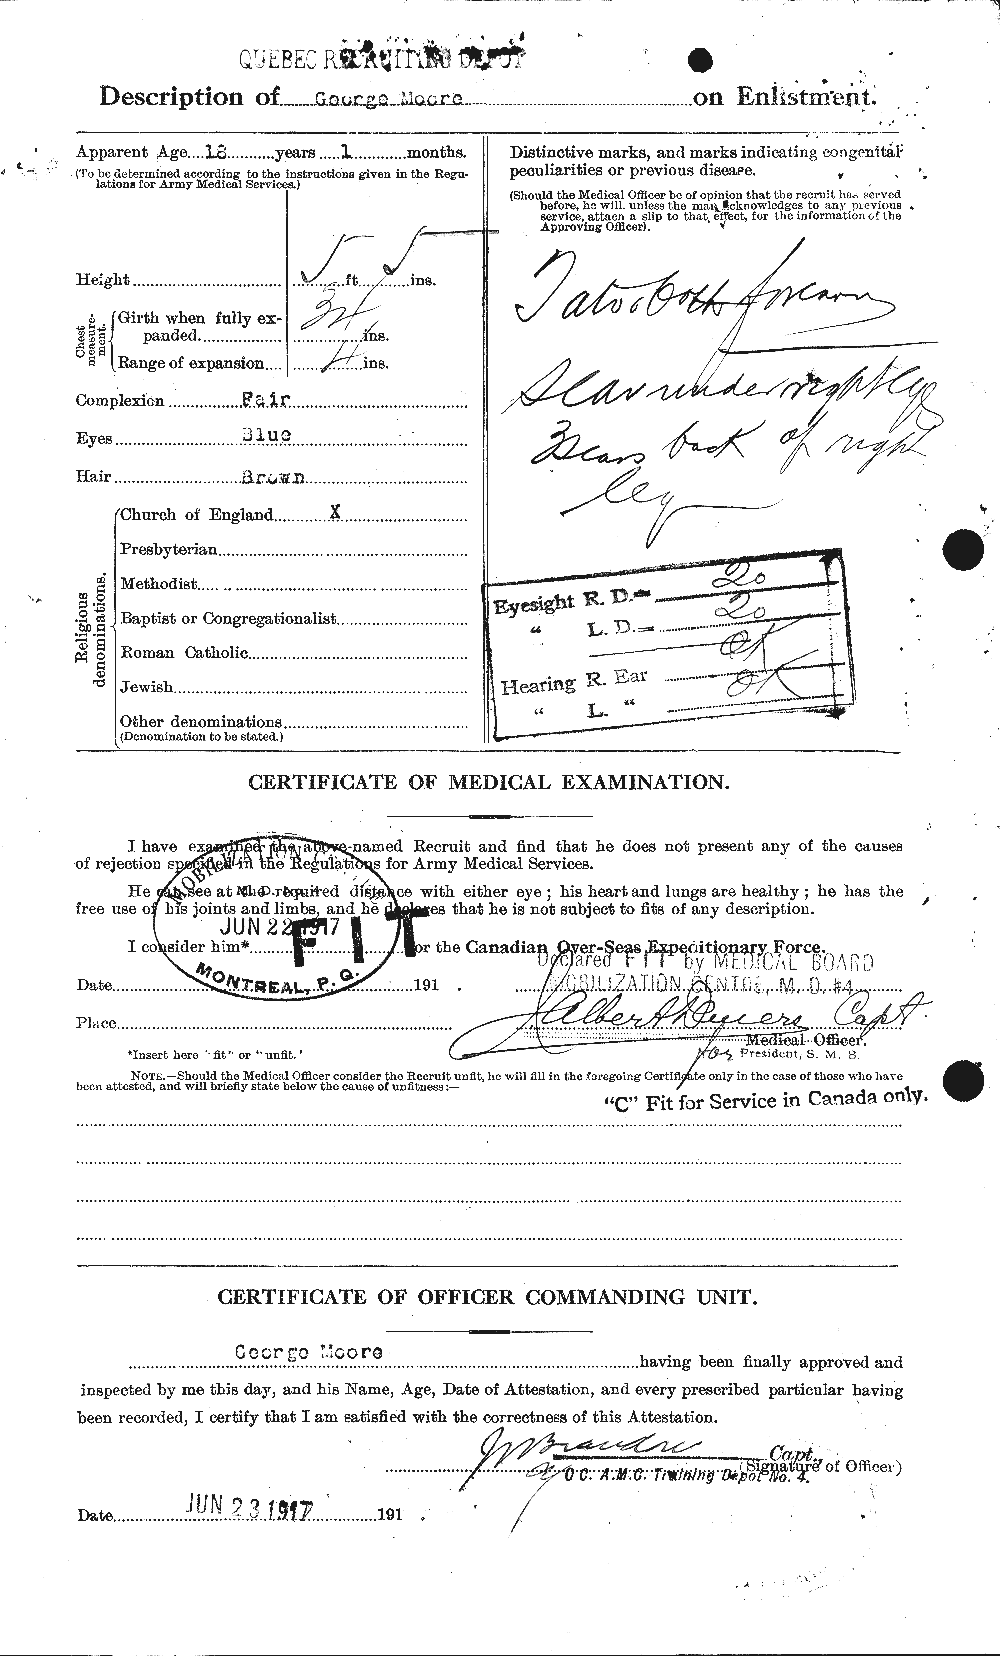 Personnel Records of the First World War - CEF 509389b